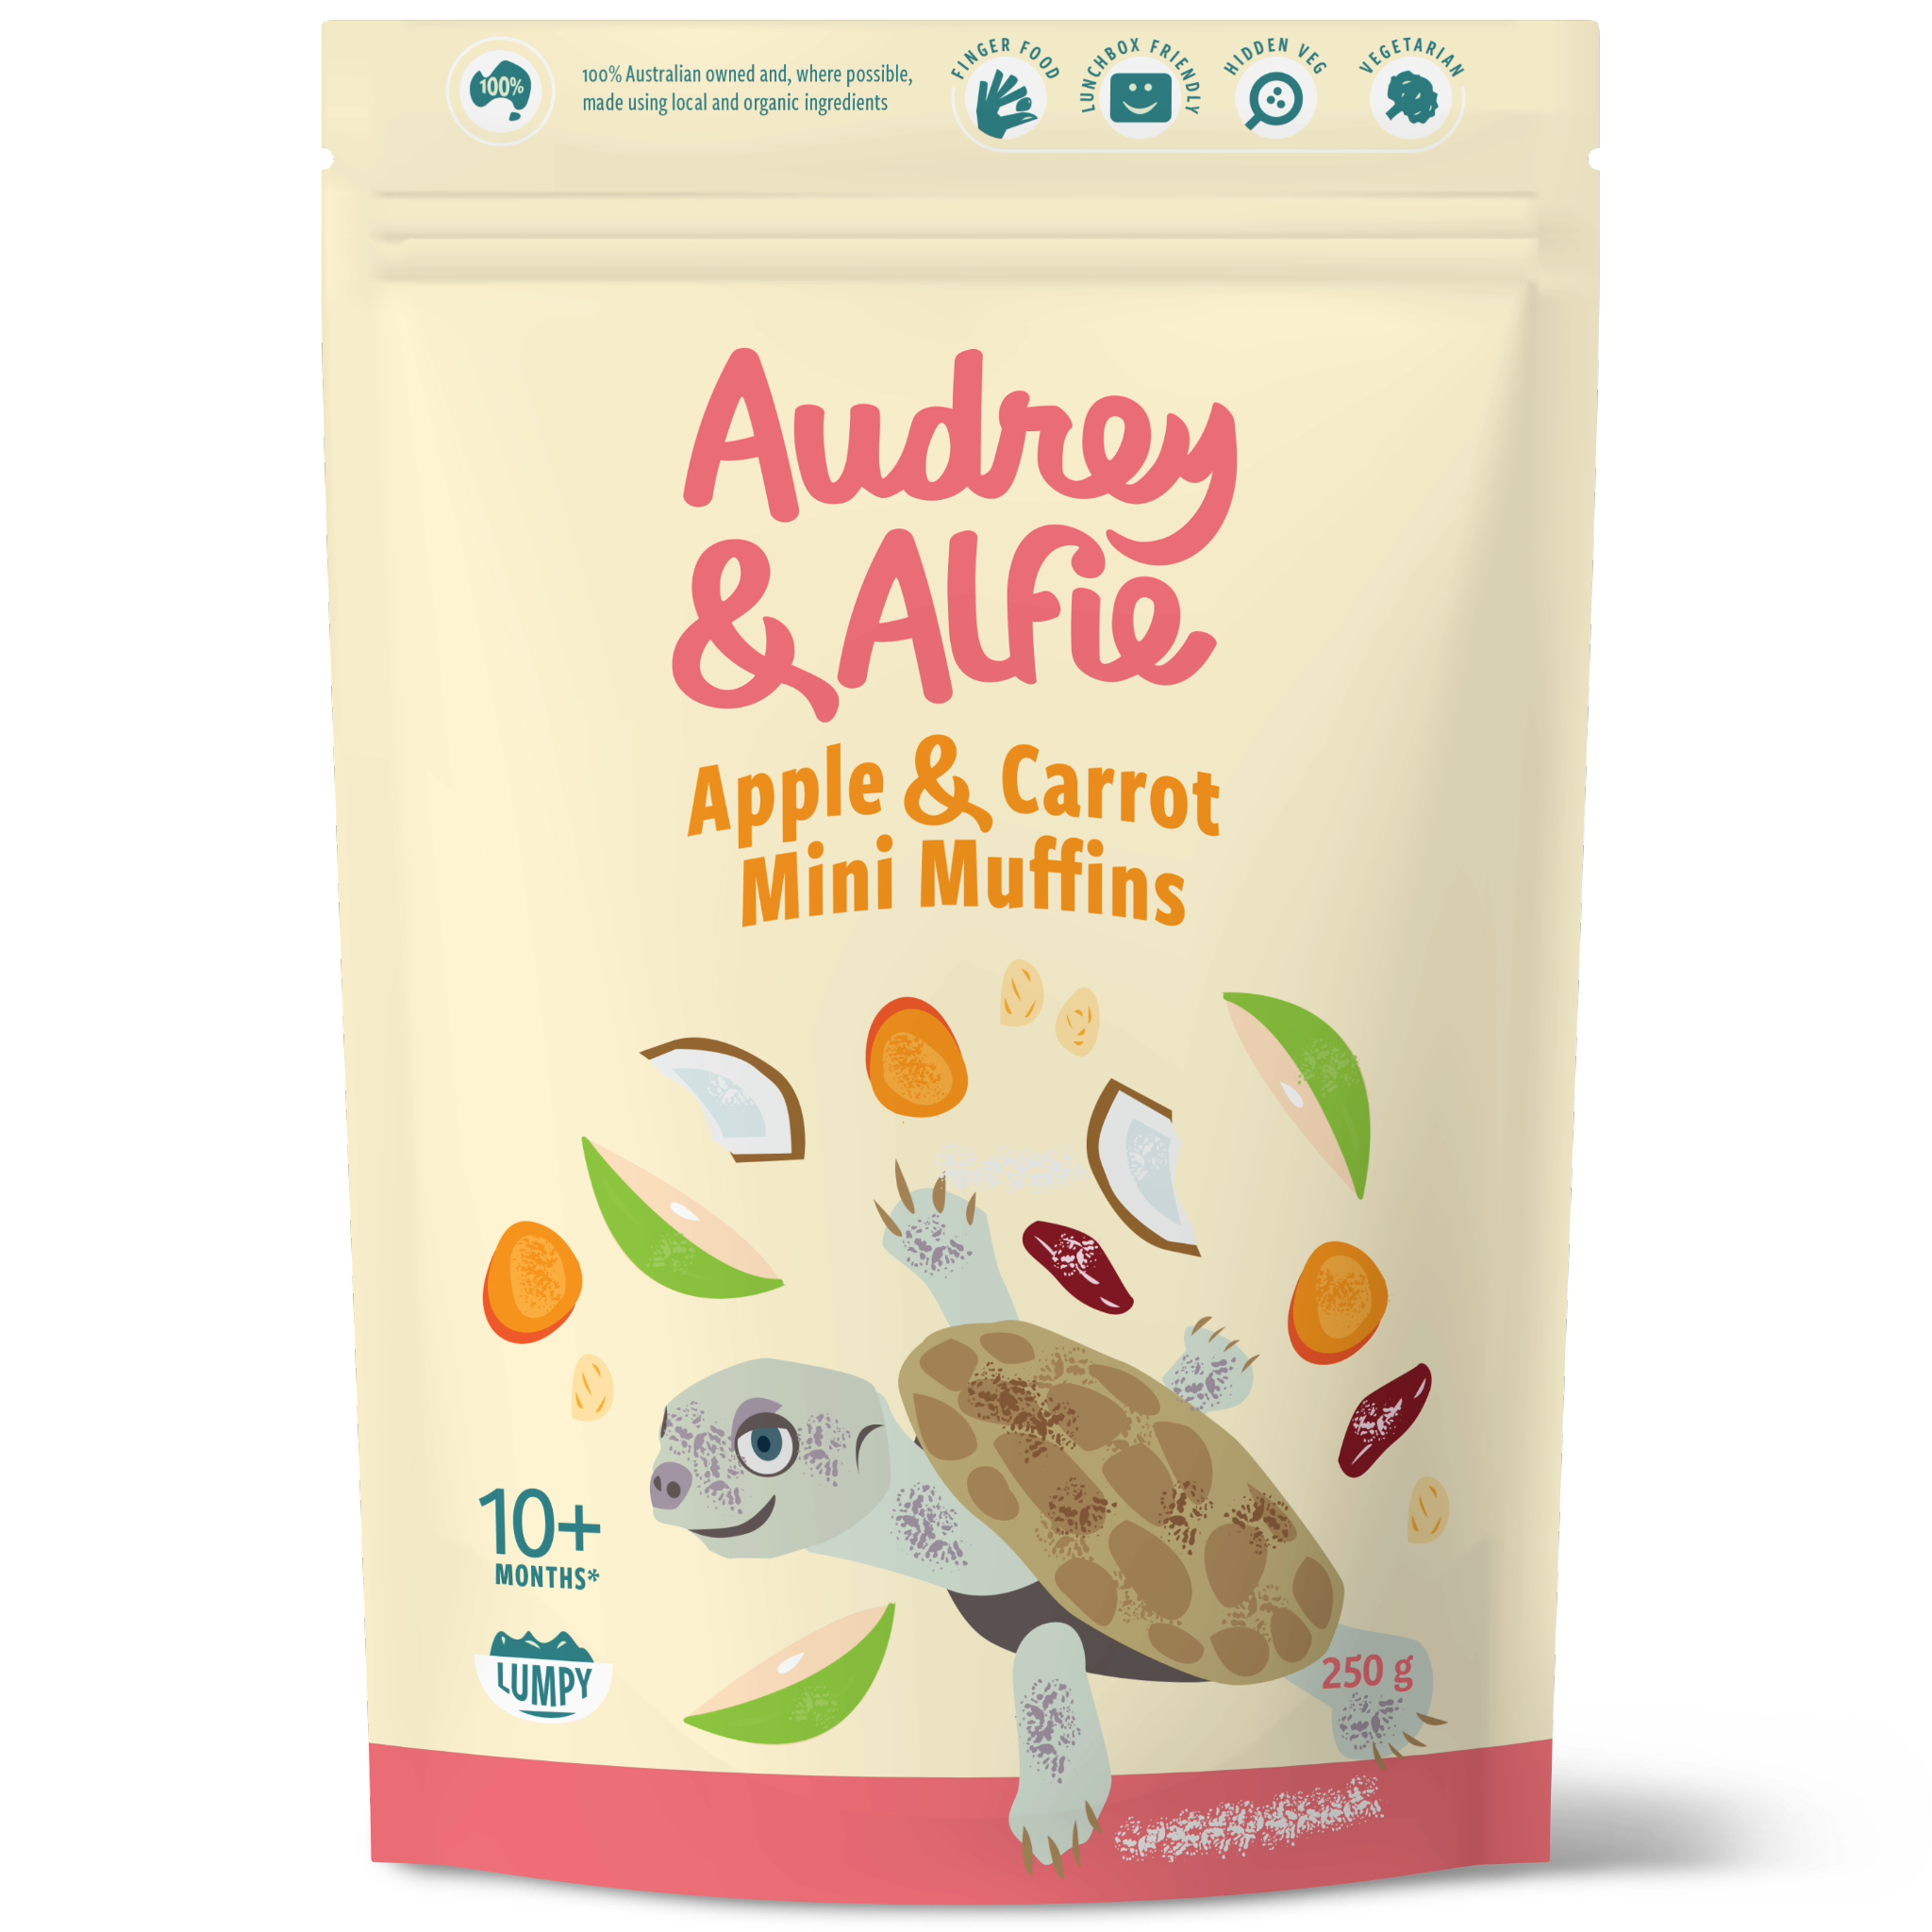 A Packet of Apple & Carrot Mini Muffins from Audrey & Alfie's Finger Food Range